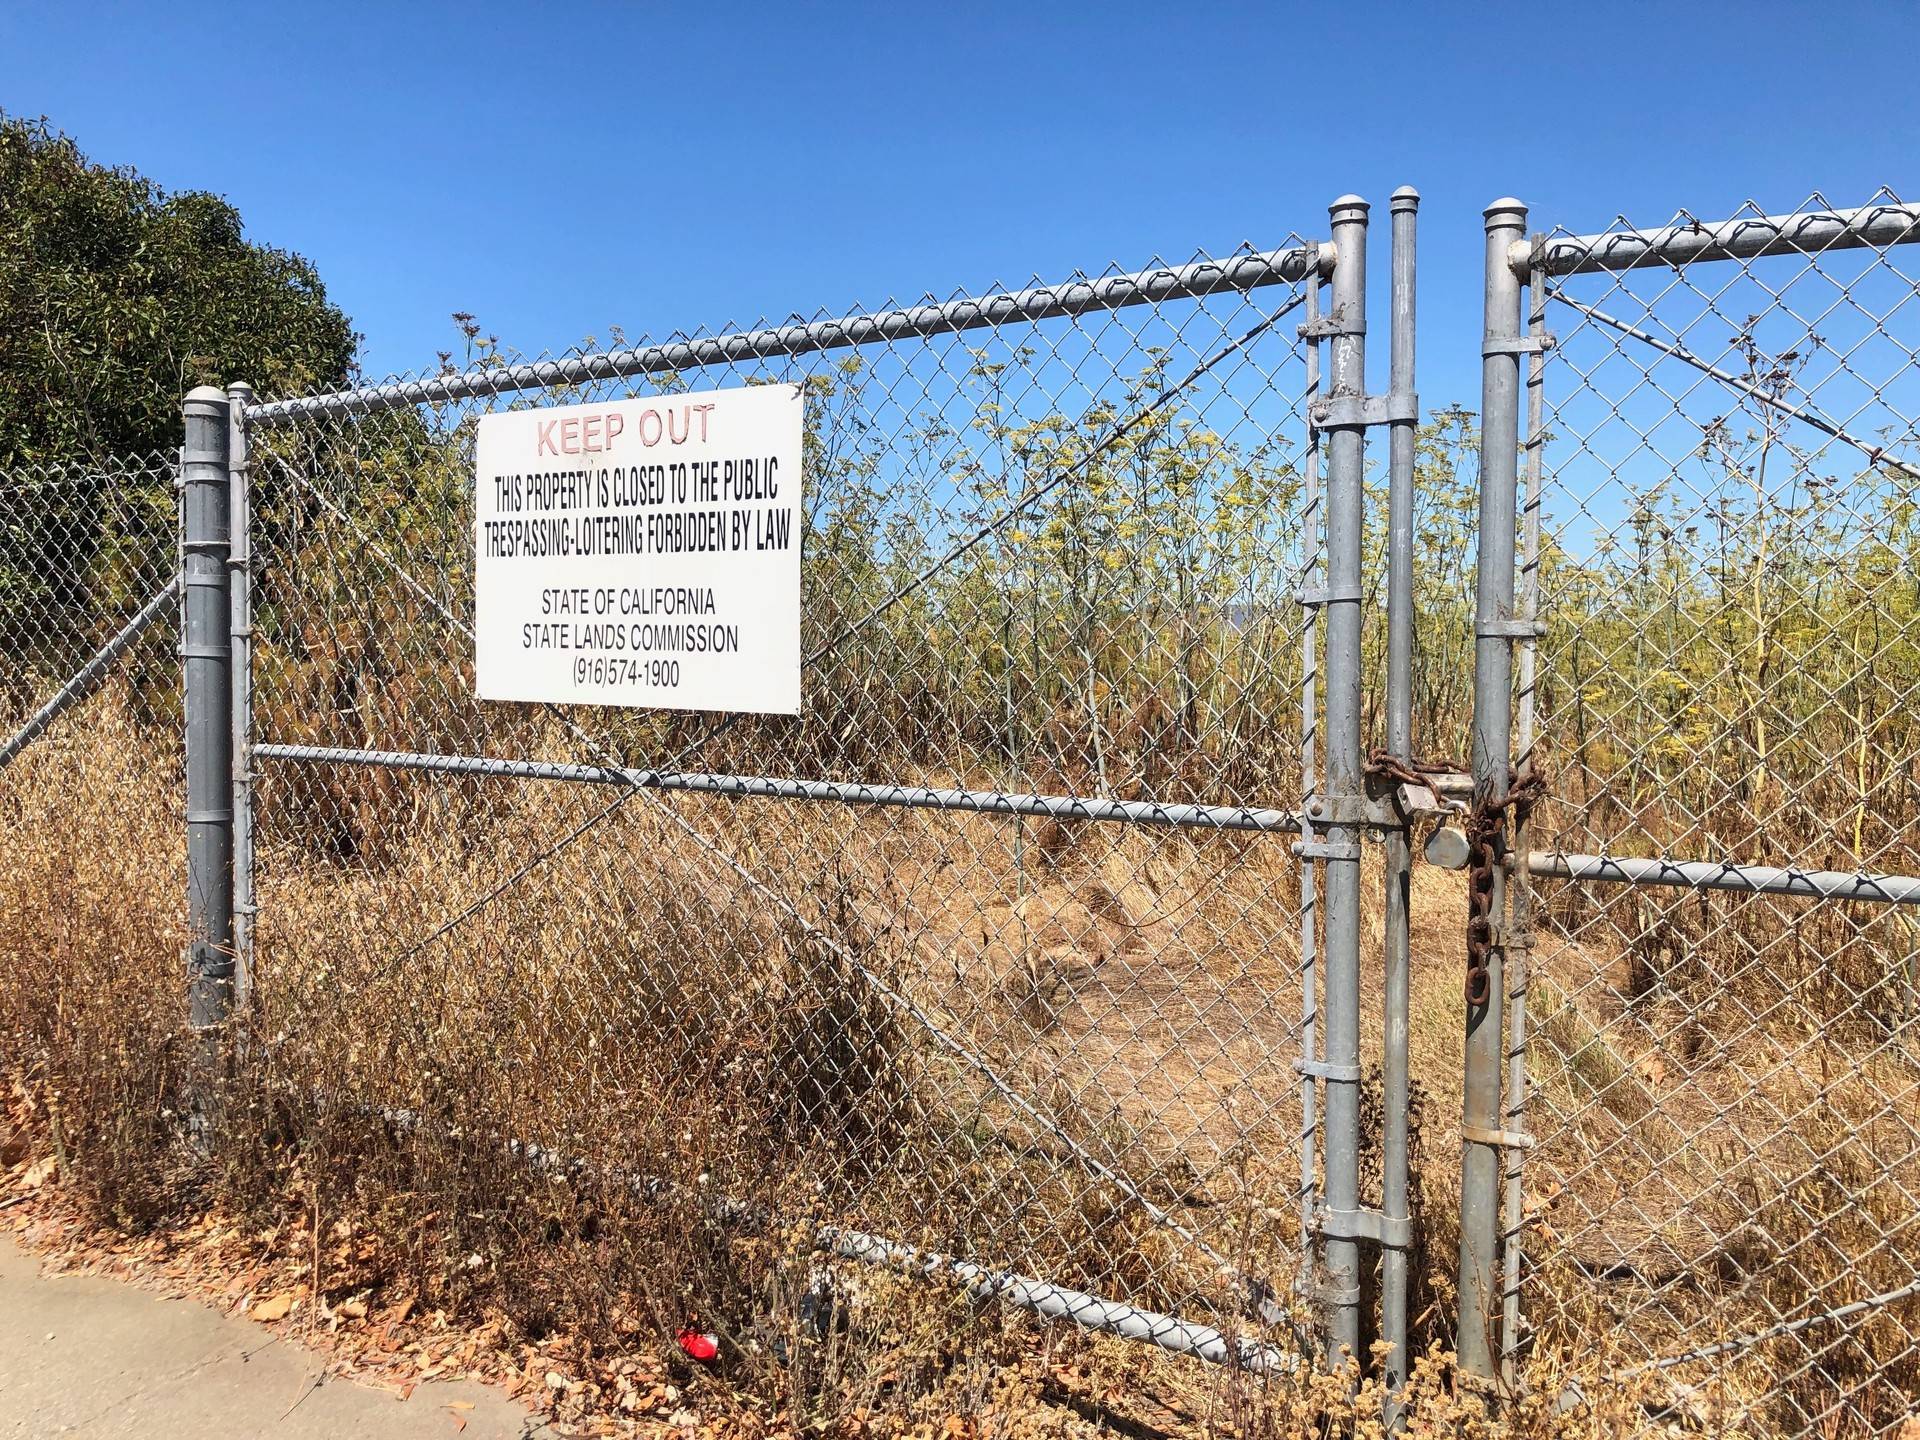 The parcel is public land managed by the State Lands Commission. The agency put up fencing around the perimeter in 1998 in an attempt to curb illegal dumping. Tiffany Camhi/KQED